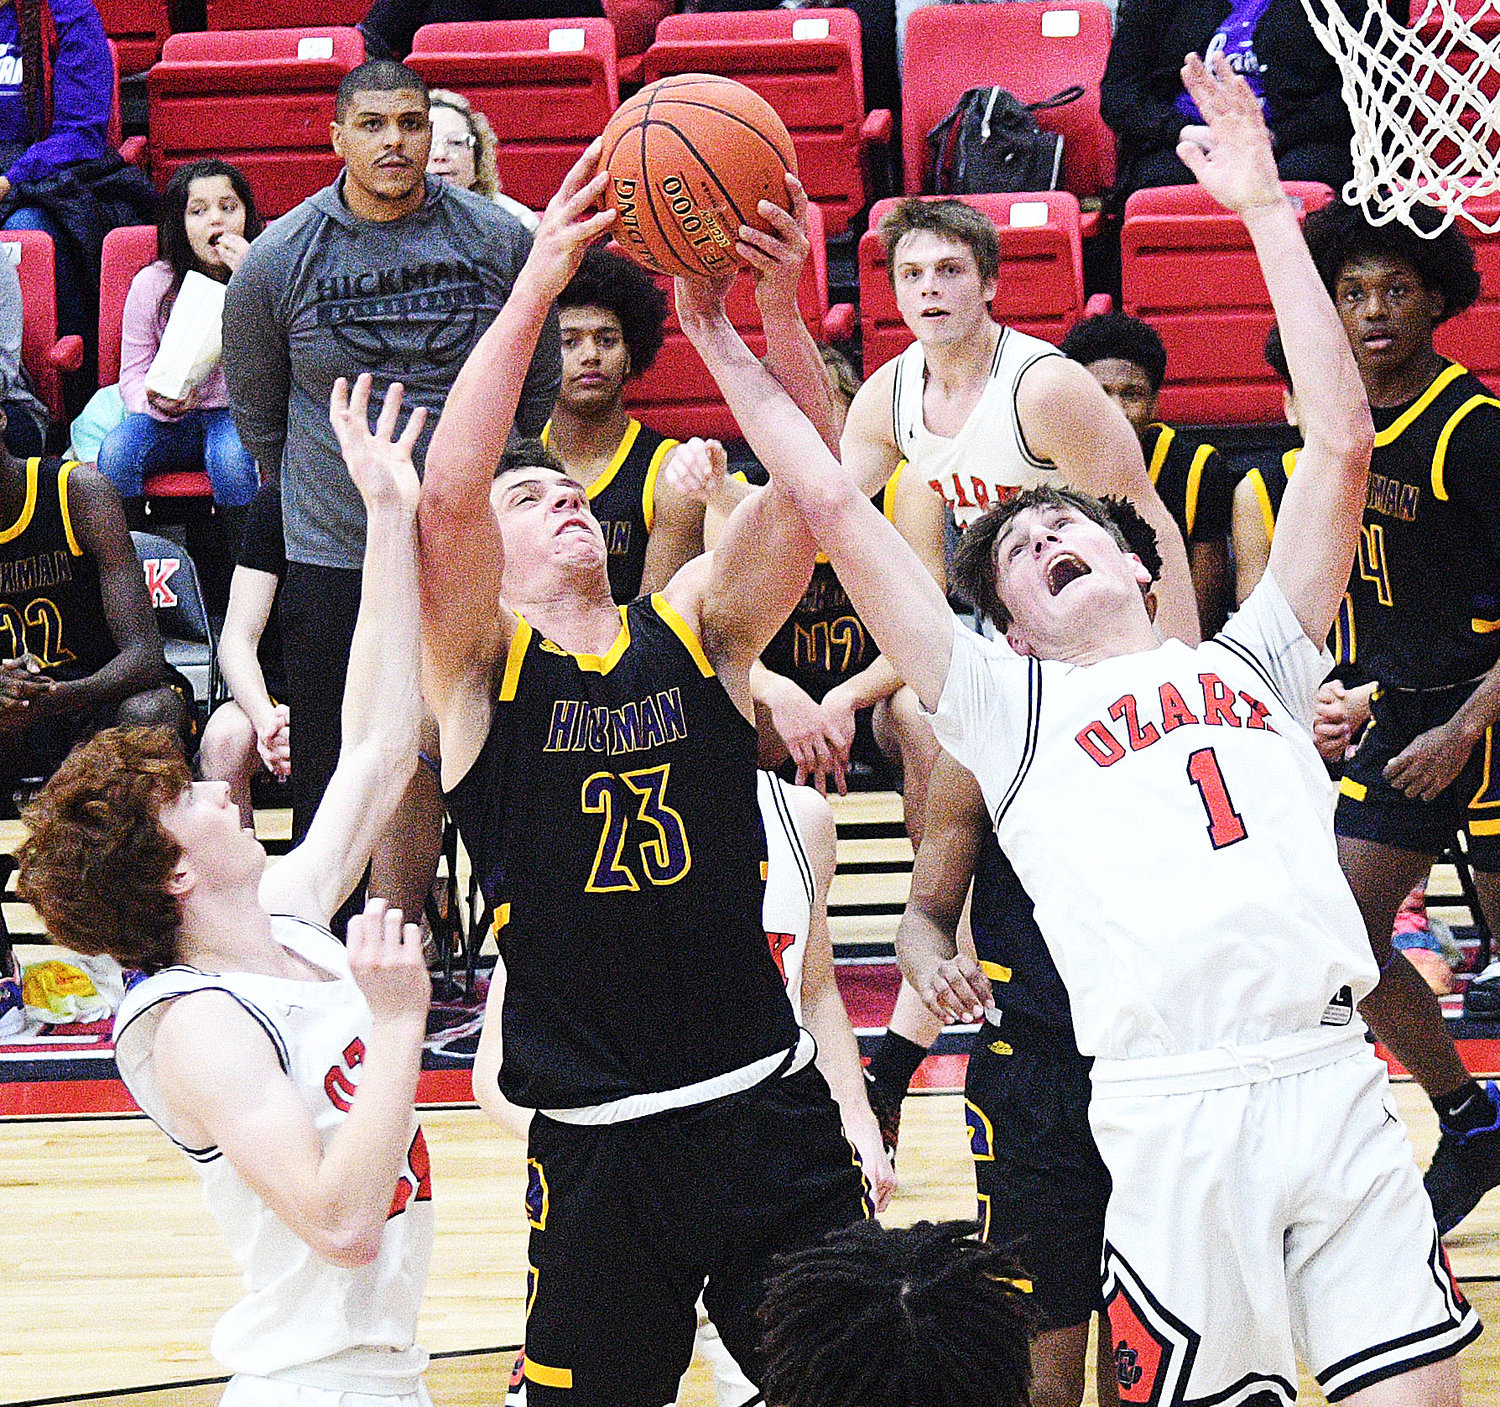 OZARK’S JACE WHATLEY fights for a rebound.